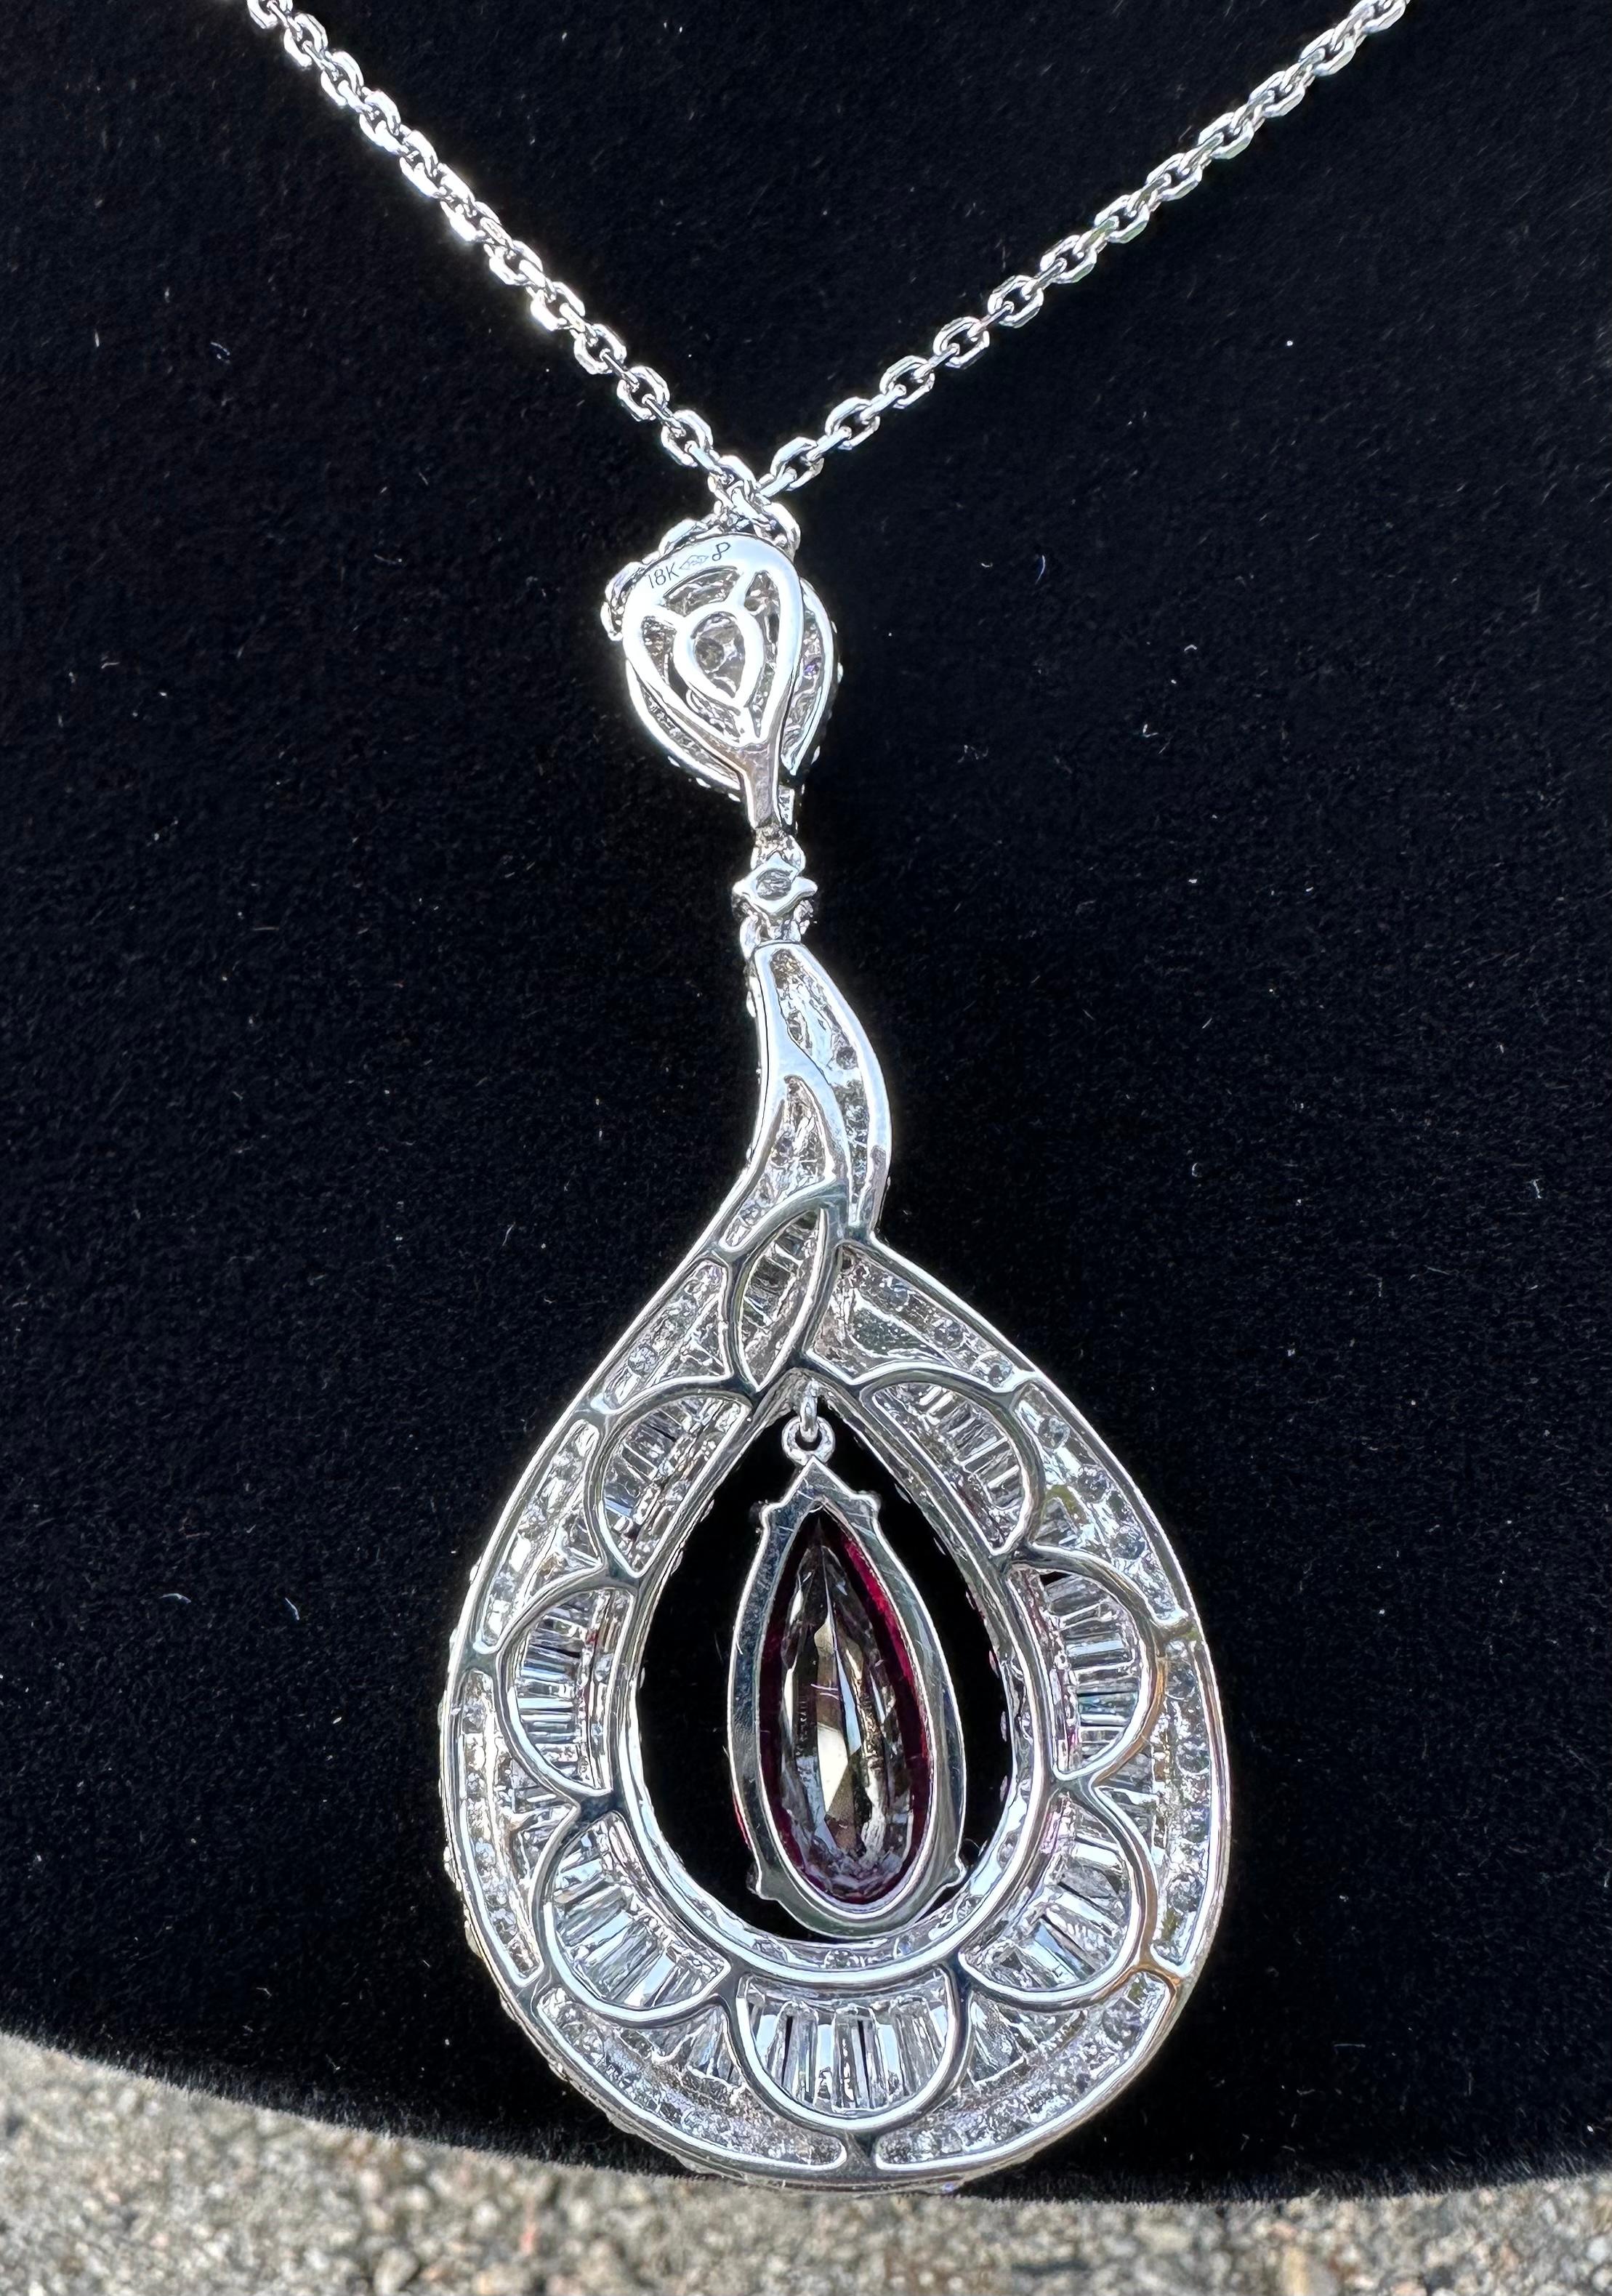 Ravishing 10.20 Carat Diamond and Rubellite Tear Drop 18K Gold Pendant on Chain In Excellent Condition For Sale In Tustin, CA